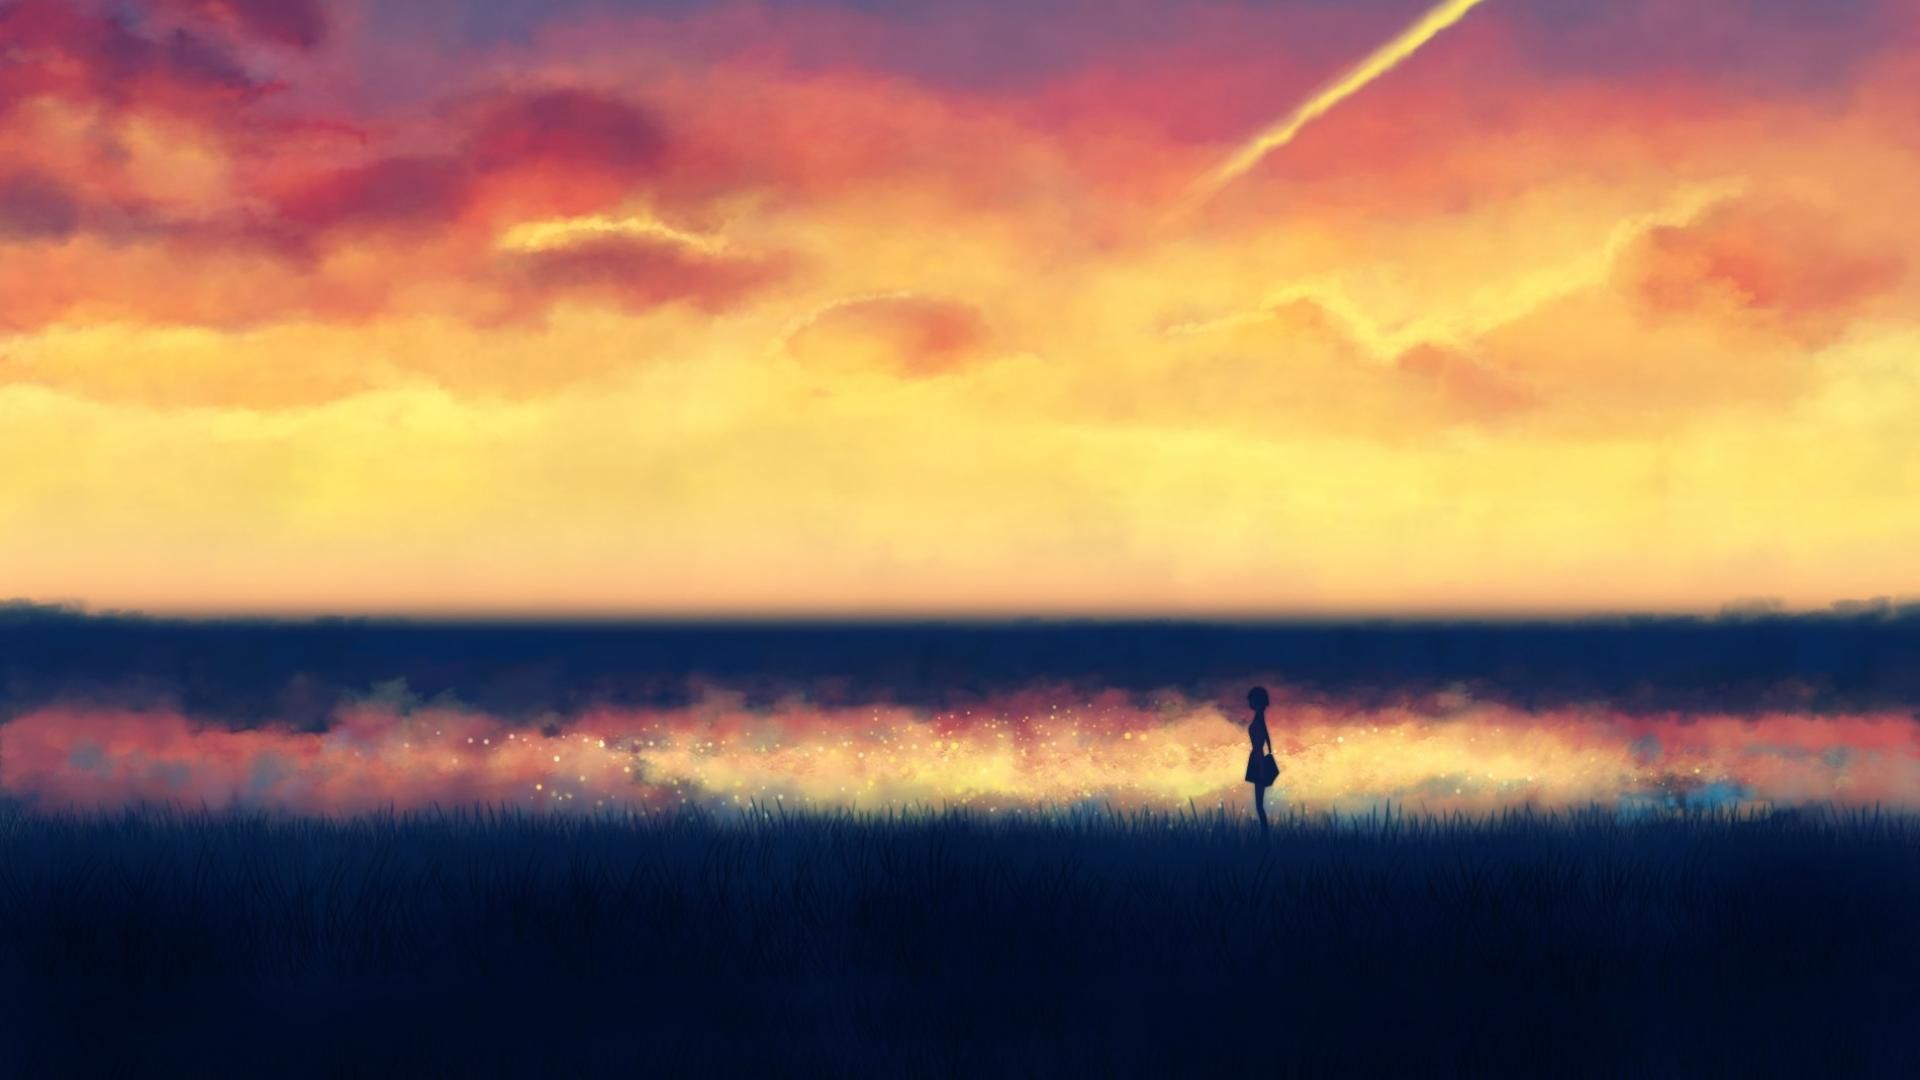 Anime scenery wallpaper 1900x1200 - (#45442) - High Quality and ...